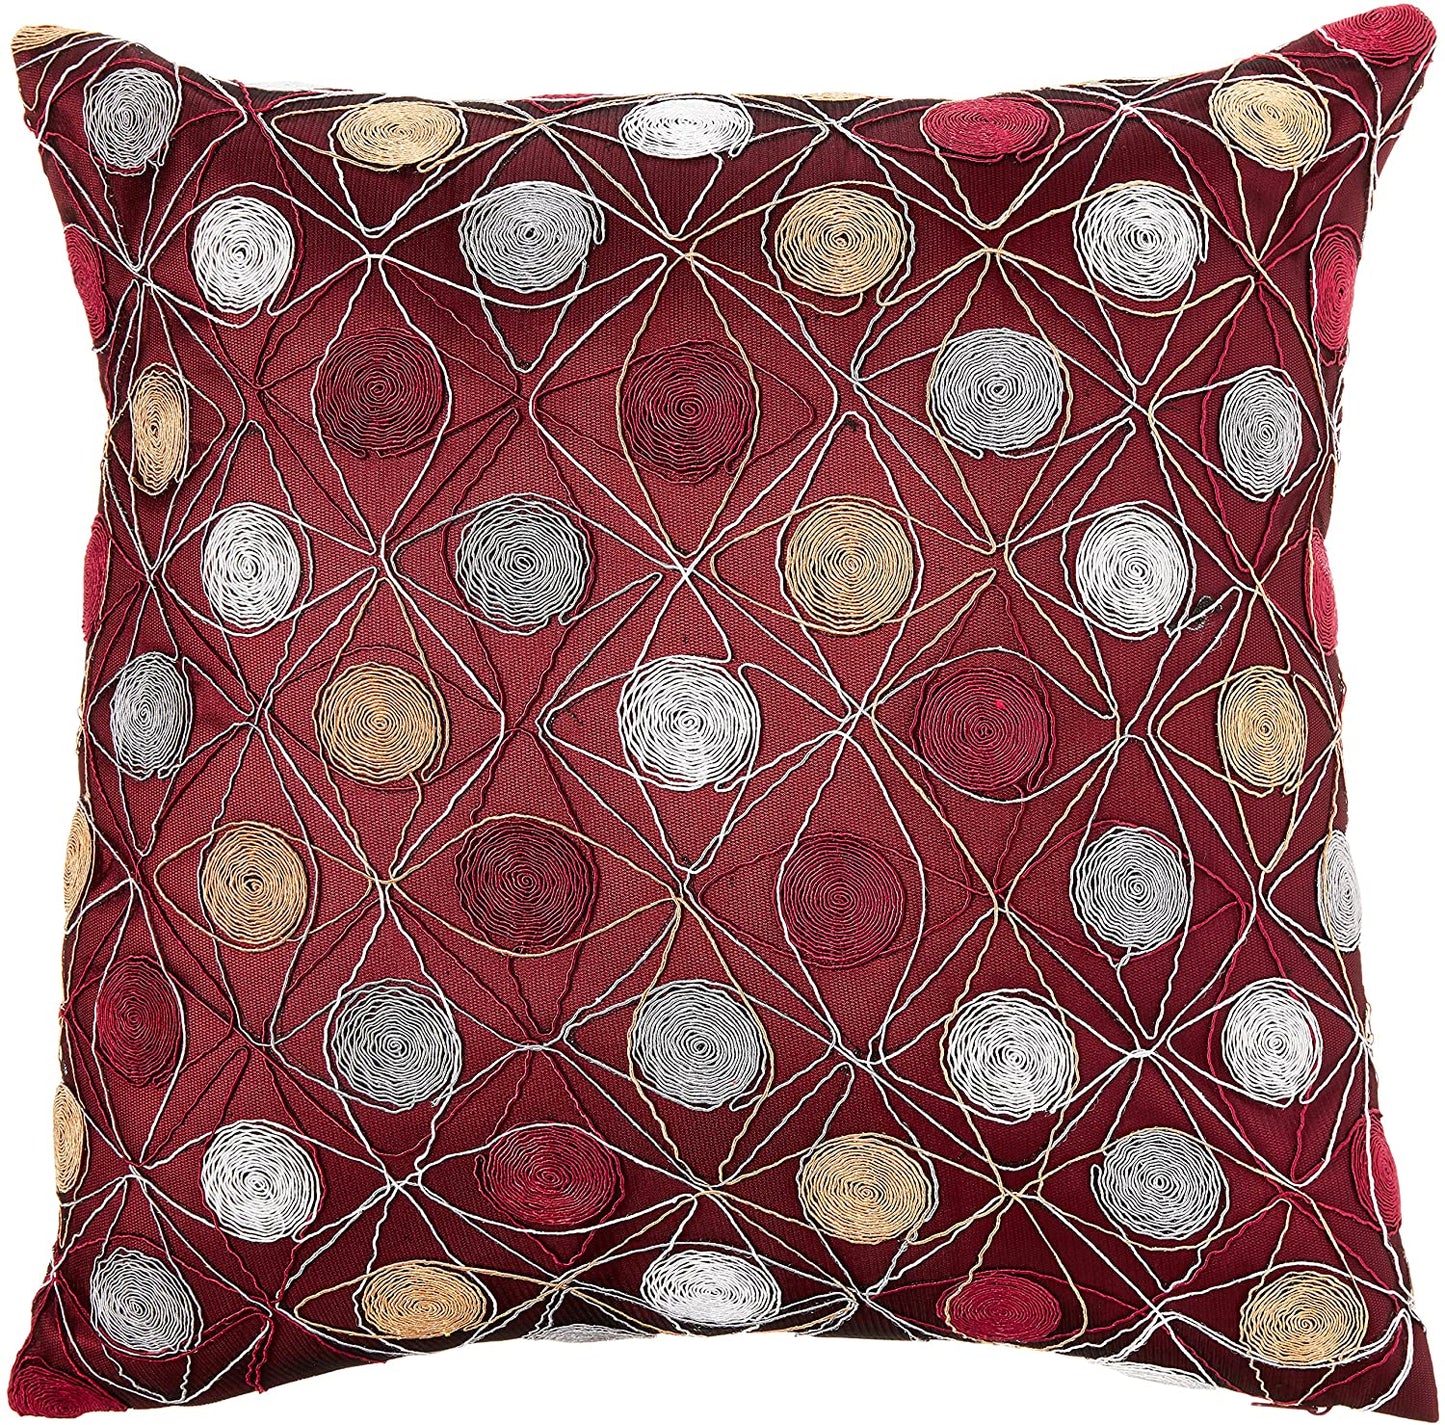 String Art Geometric Embroidery Pattern Decorative Accent Throw Pillow